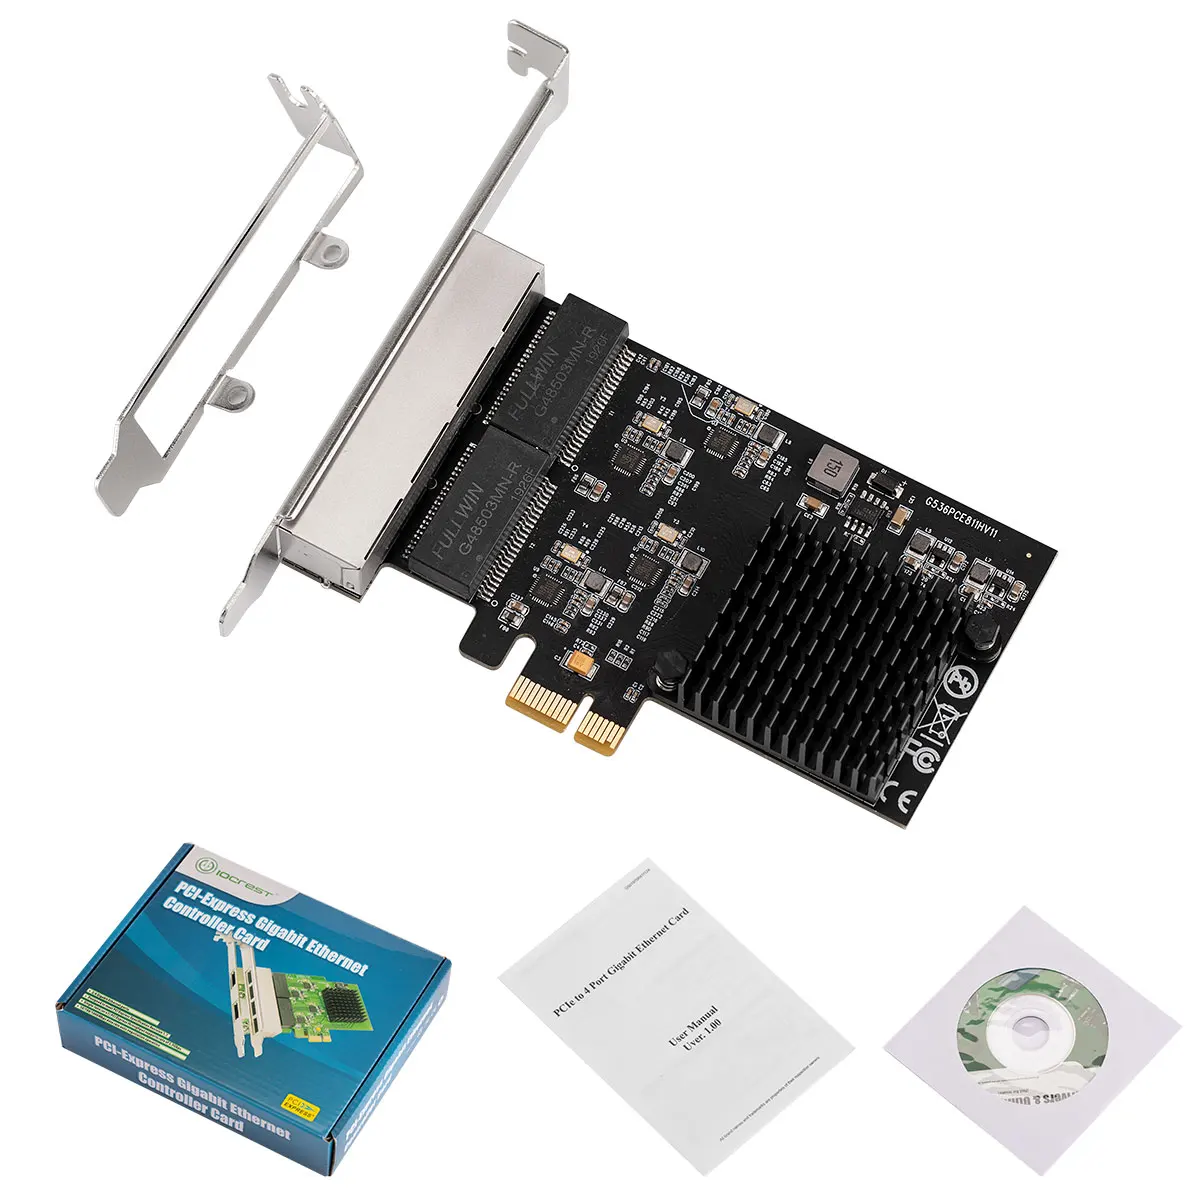 IOCREST PCI-Express 4 Ports Gigabit Ethernet Controller Card RTL8111H Chips with Low Profile Bracket